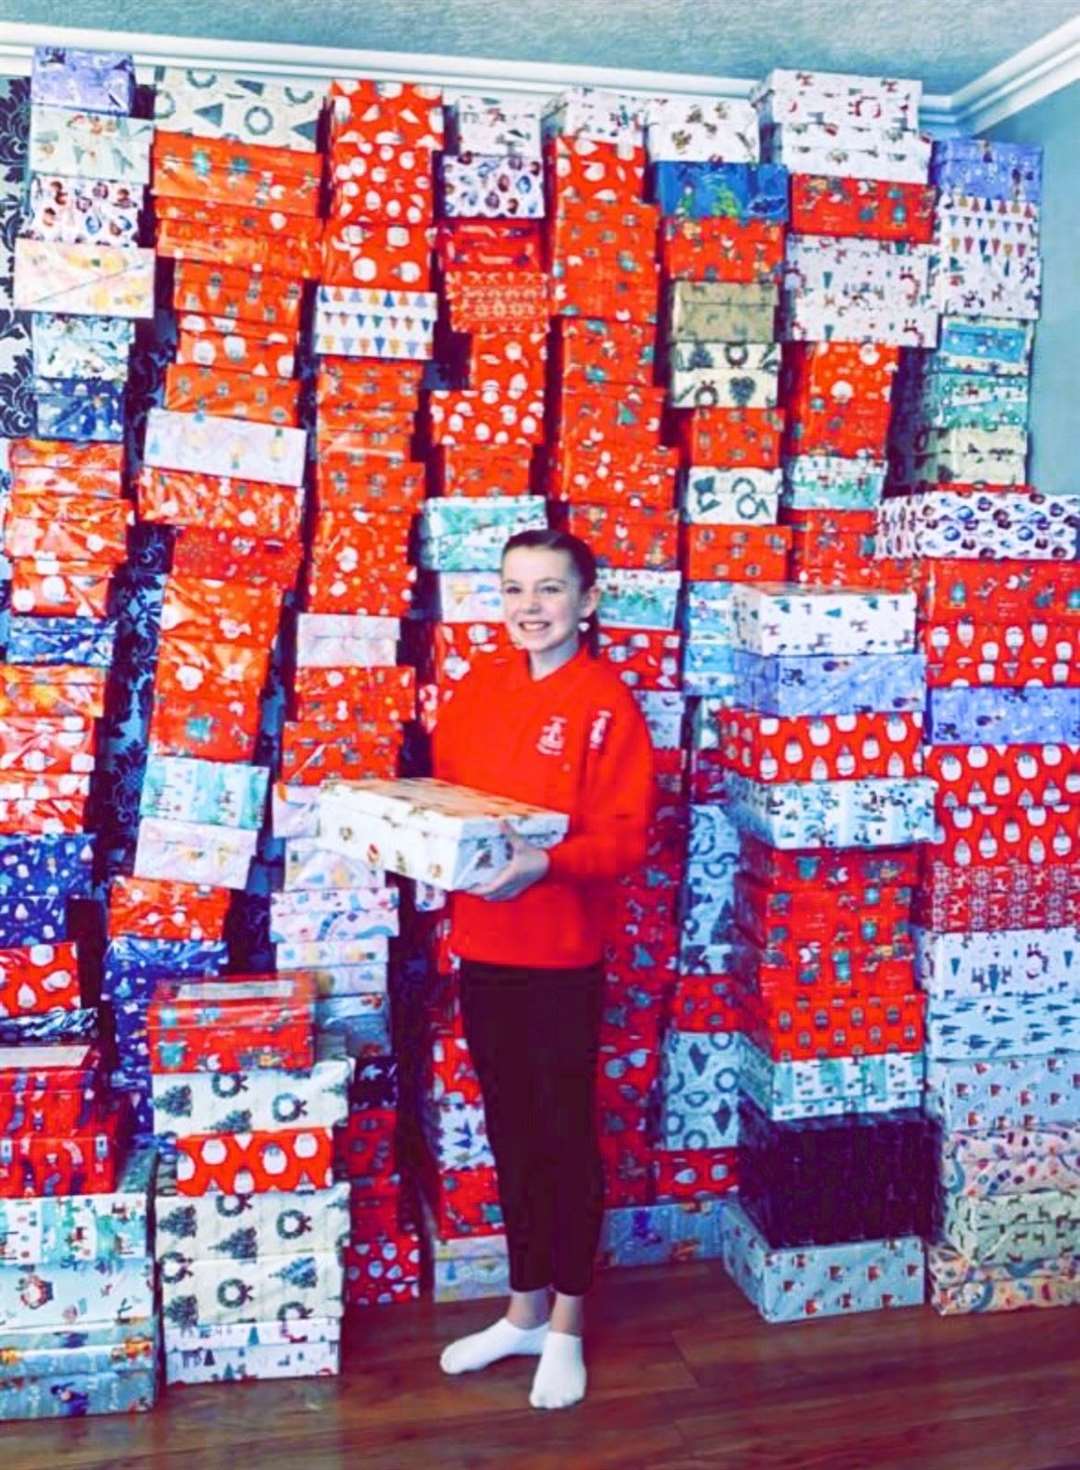 Ellie gathered over 200 shoeboxes for the Blythswood Shoe Box Appeal.